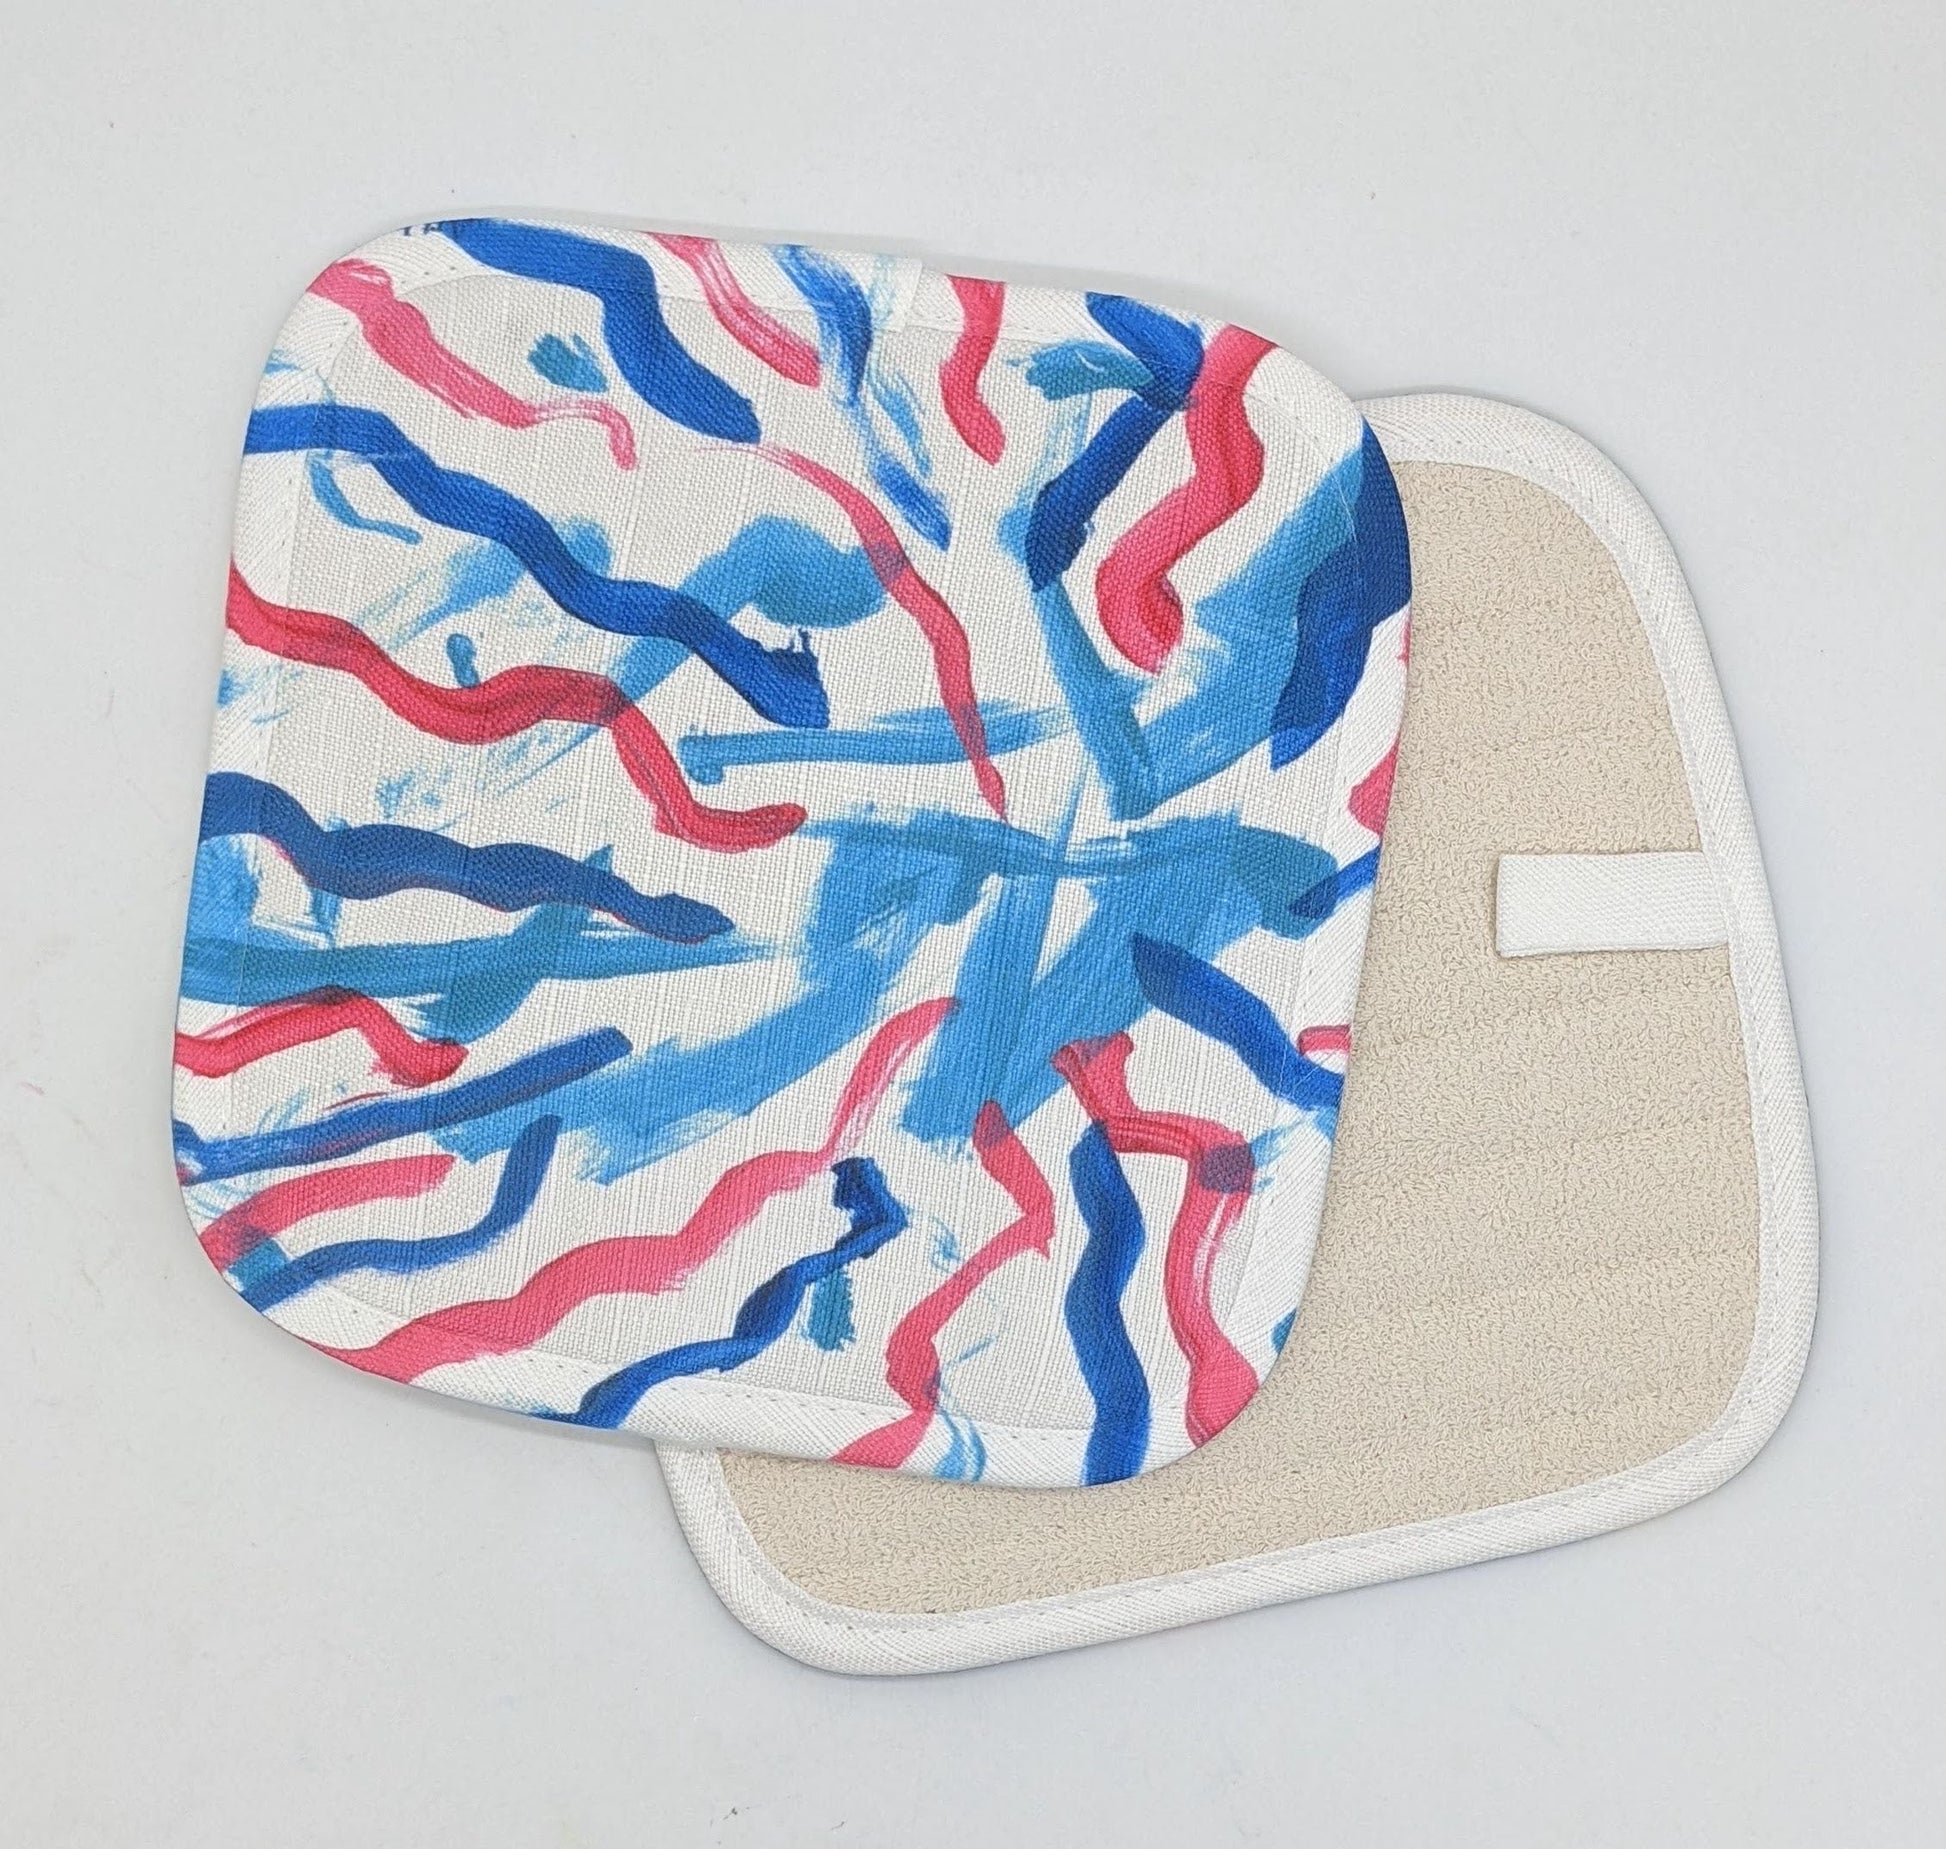 This is a potholder that shows blue streaks of paints with several pink and dark blue squiggles of paint going toward it